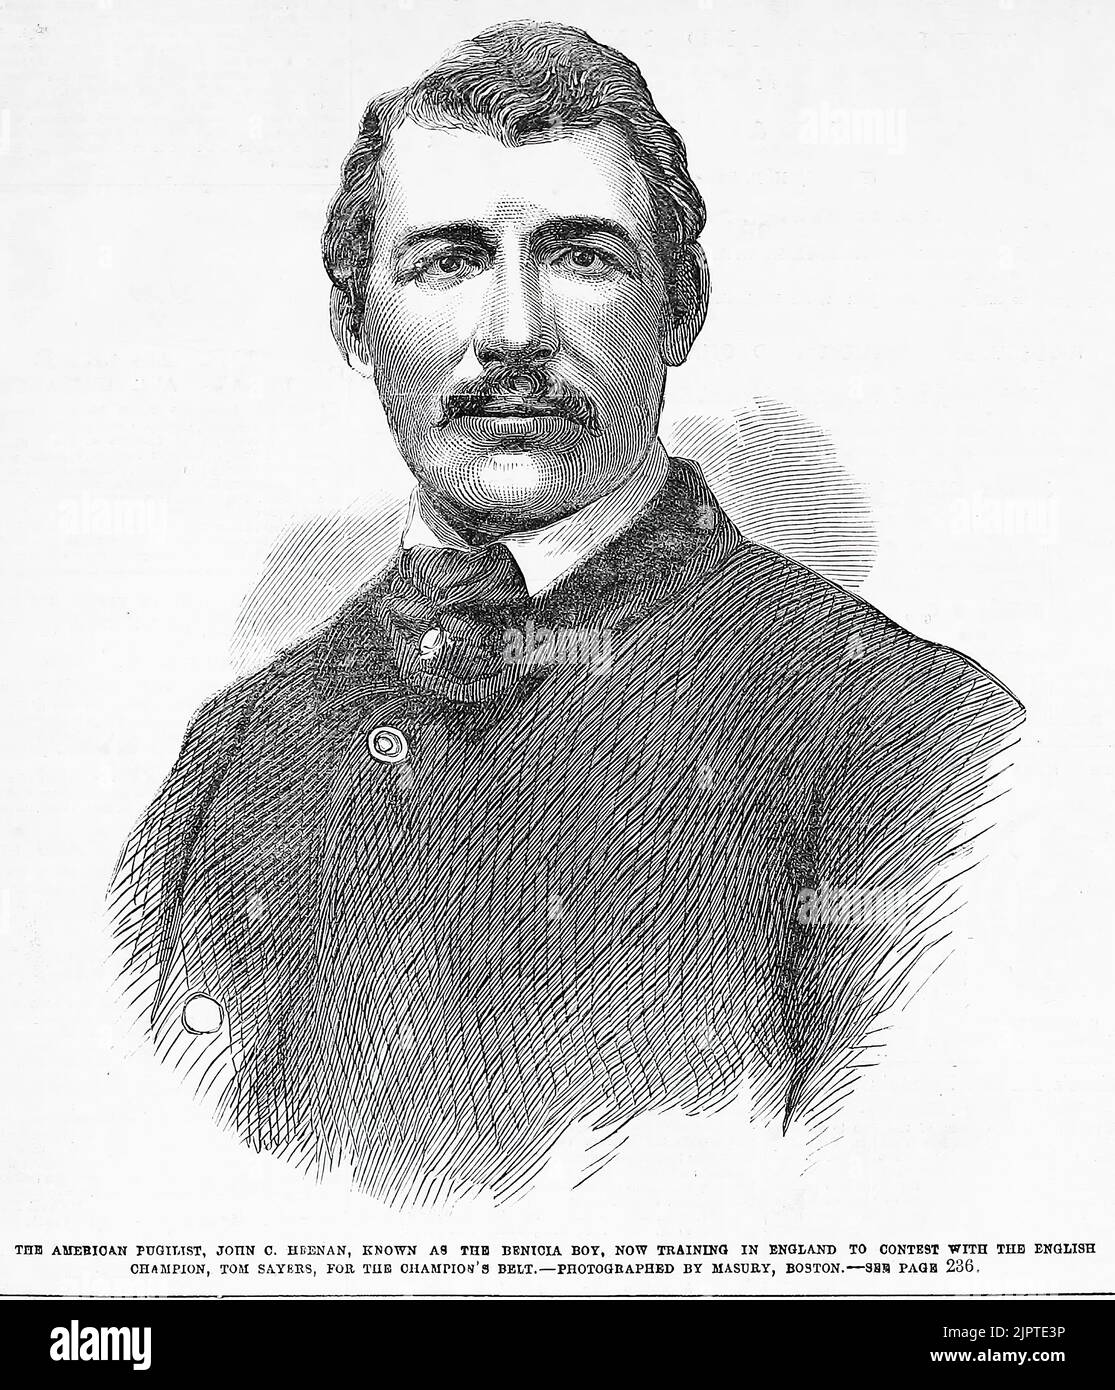 Portrait of the American pugilist, John Camel Heenan, known as the Benicia Boy, now training in England to contest with the English champion, Tom Sayers, for the champion's belt (1860). 19th century illustration from Frank Leslie's Illustrated Newspaper Stock Photo